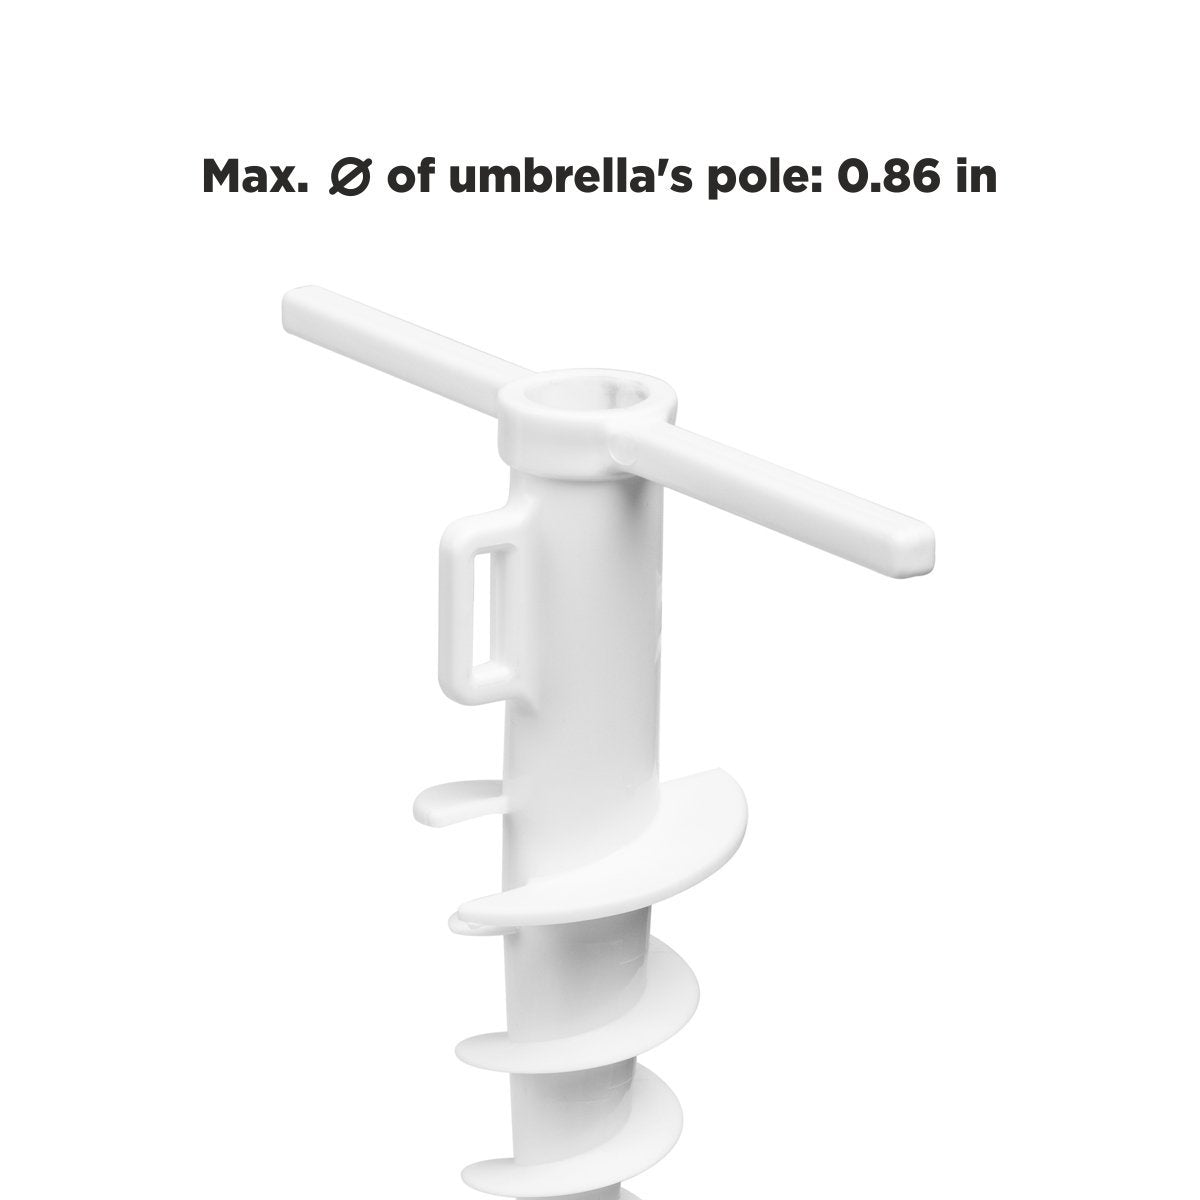 The max diamater of umbrella pole the Plastic Beach Umbrella Sand Anchor could hold is 0.86 inches